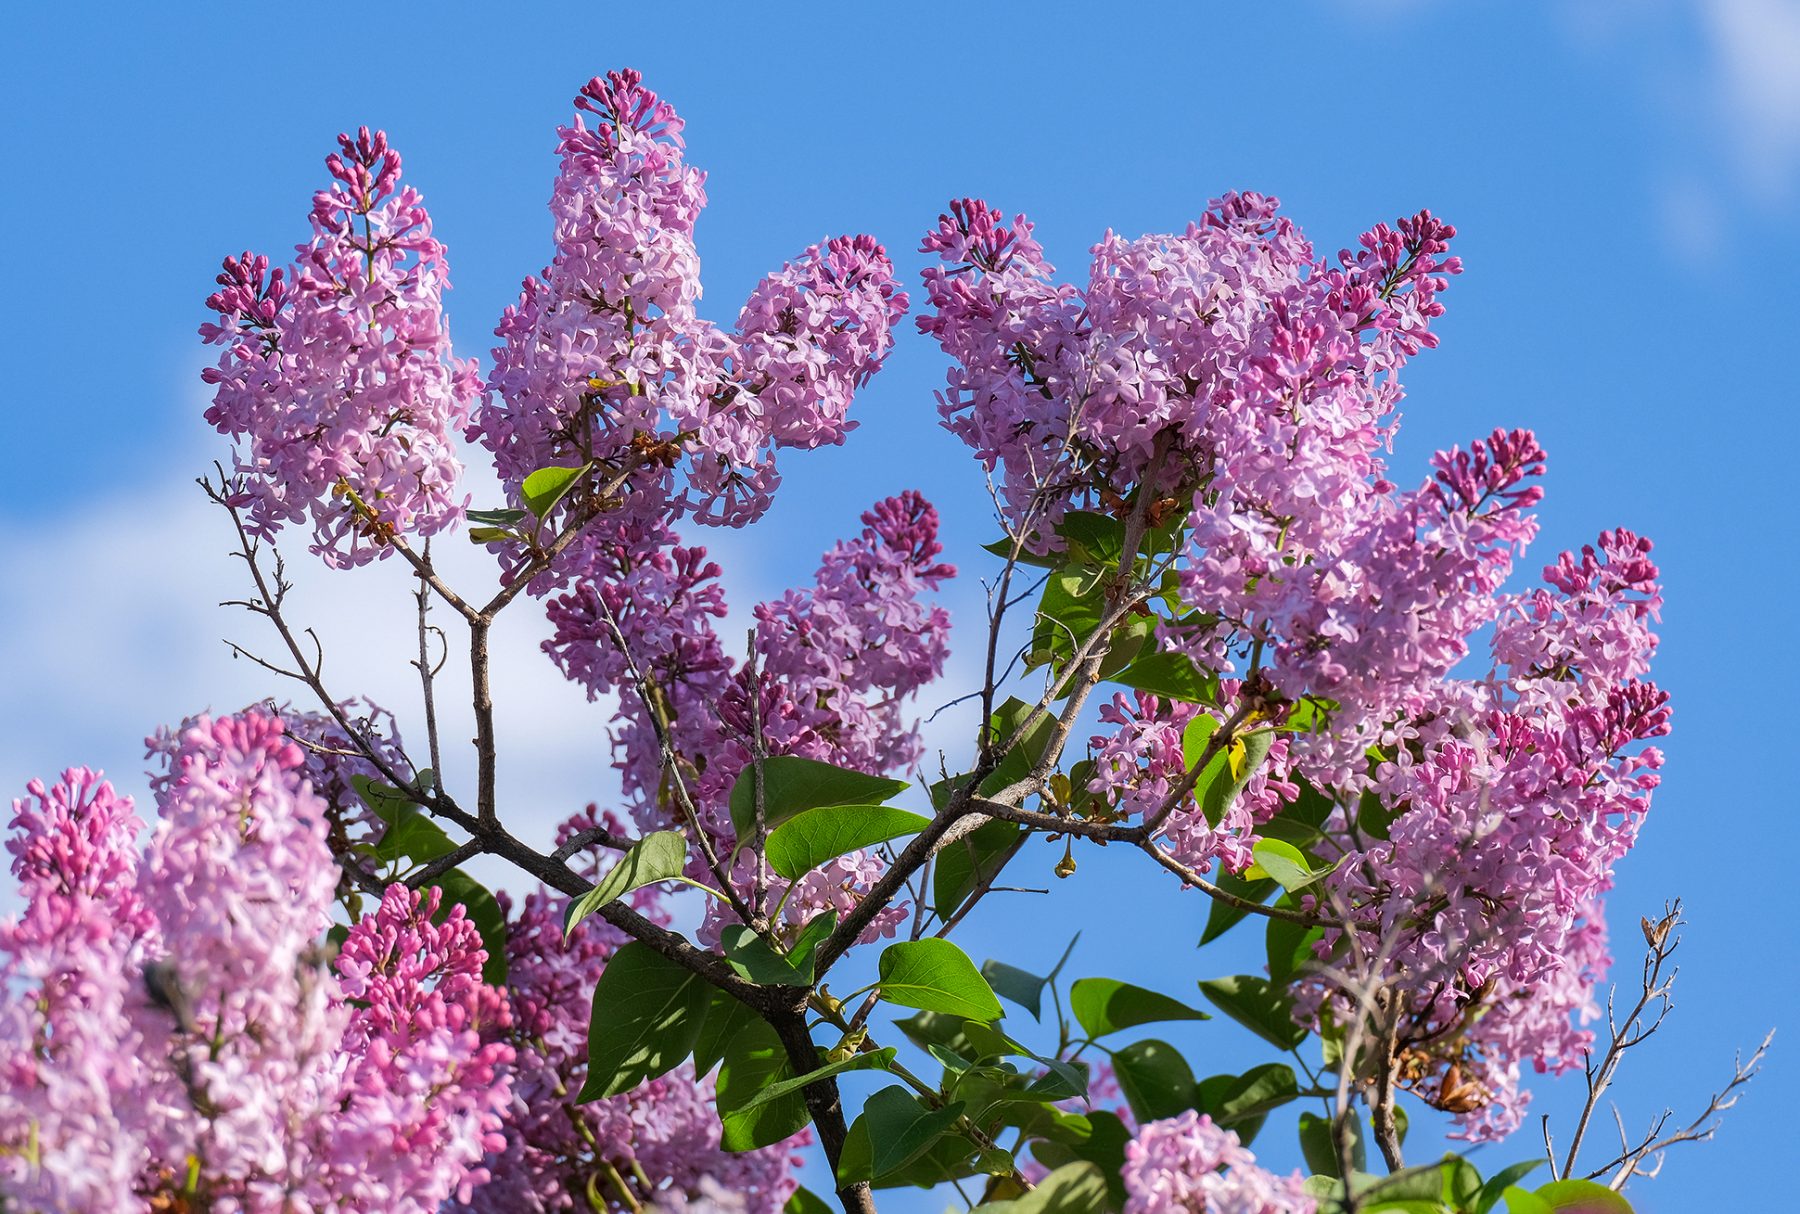 Fresh lilac blossoms fill the air. The scent this time of year is amazing in Longfellow.